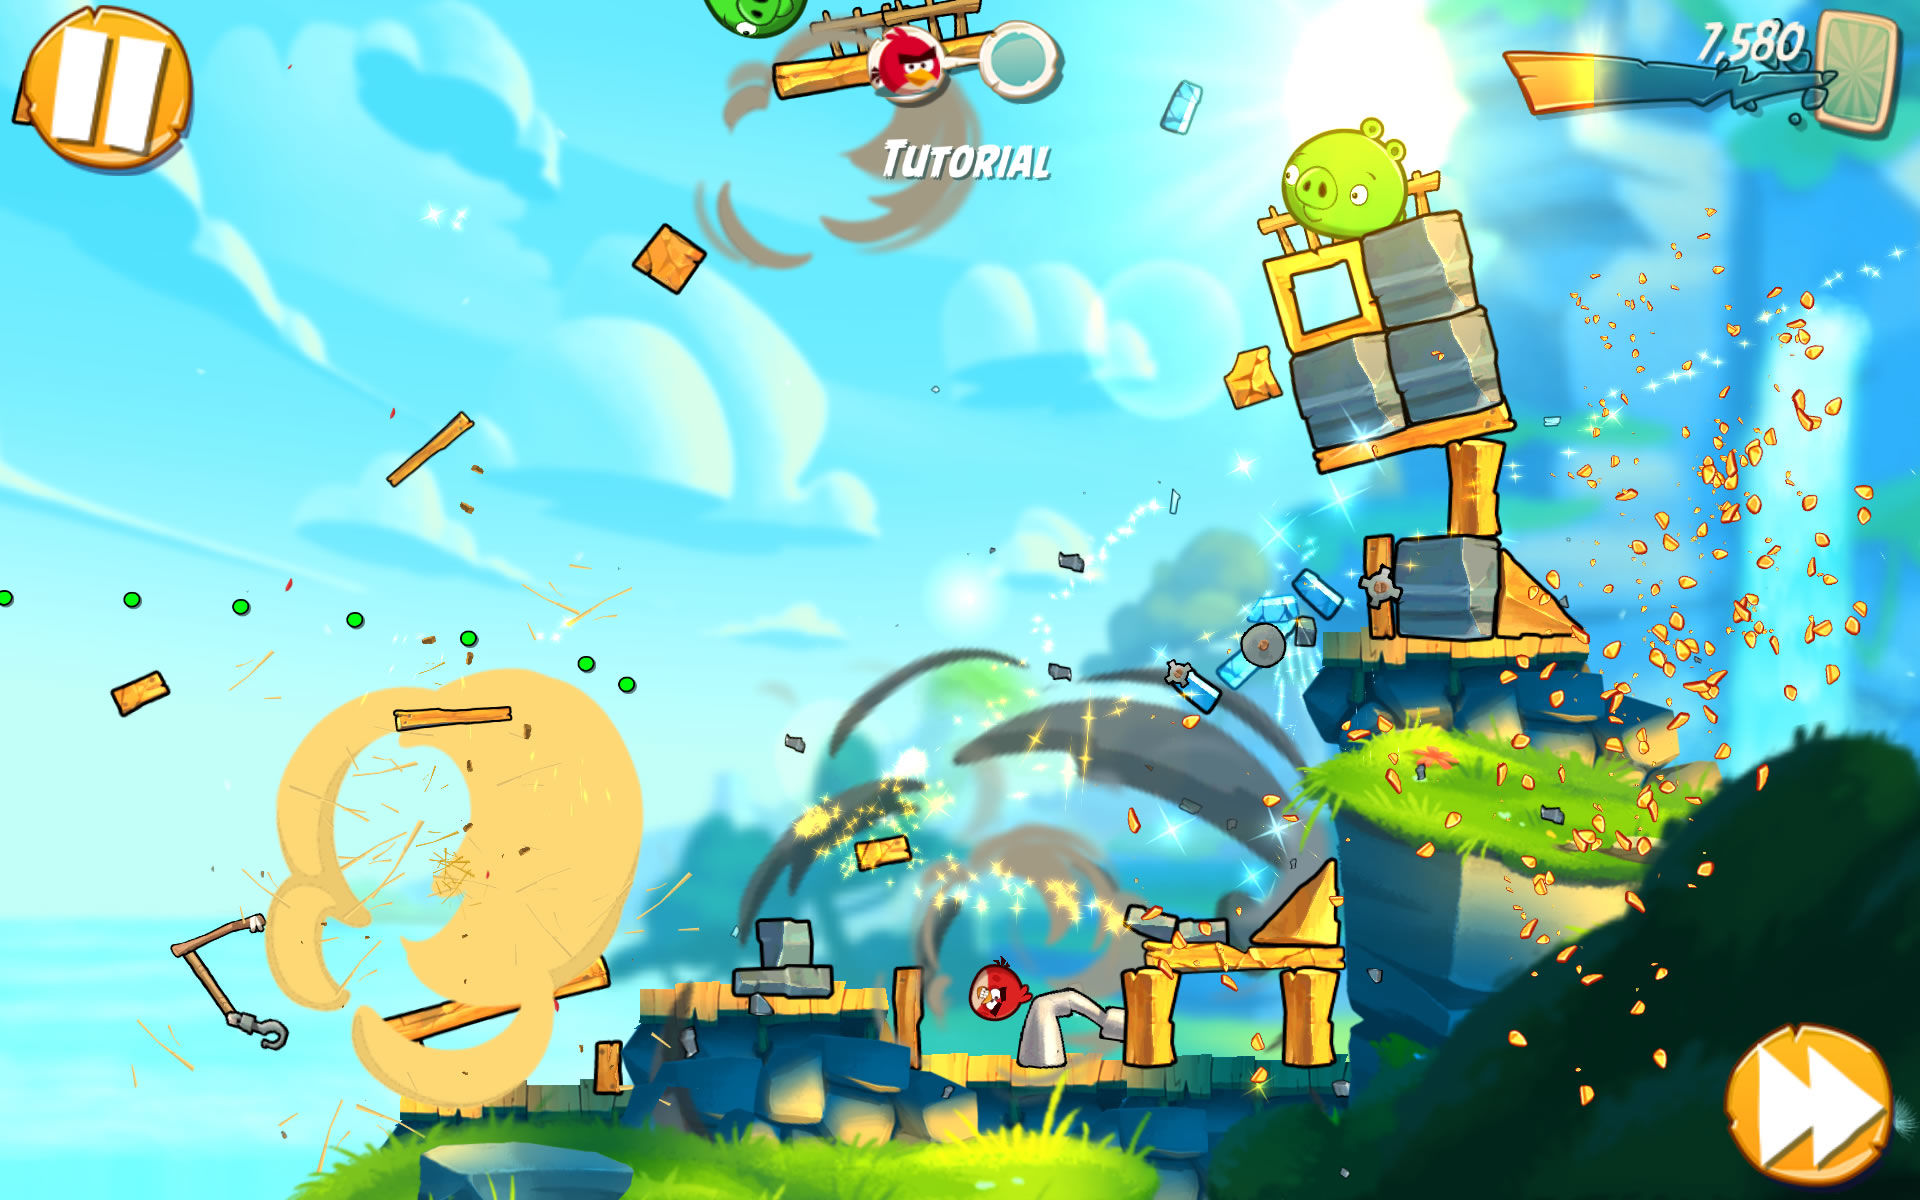 Angry birds empowers the player